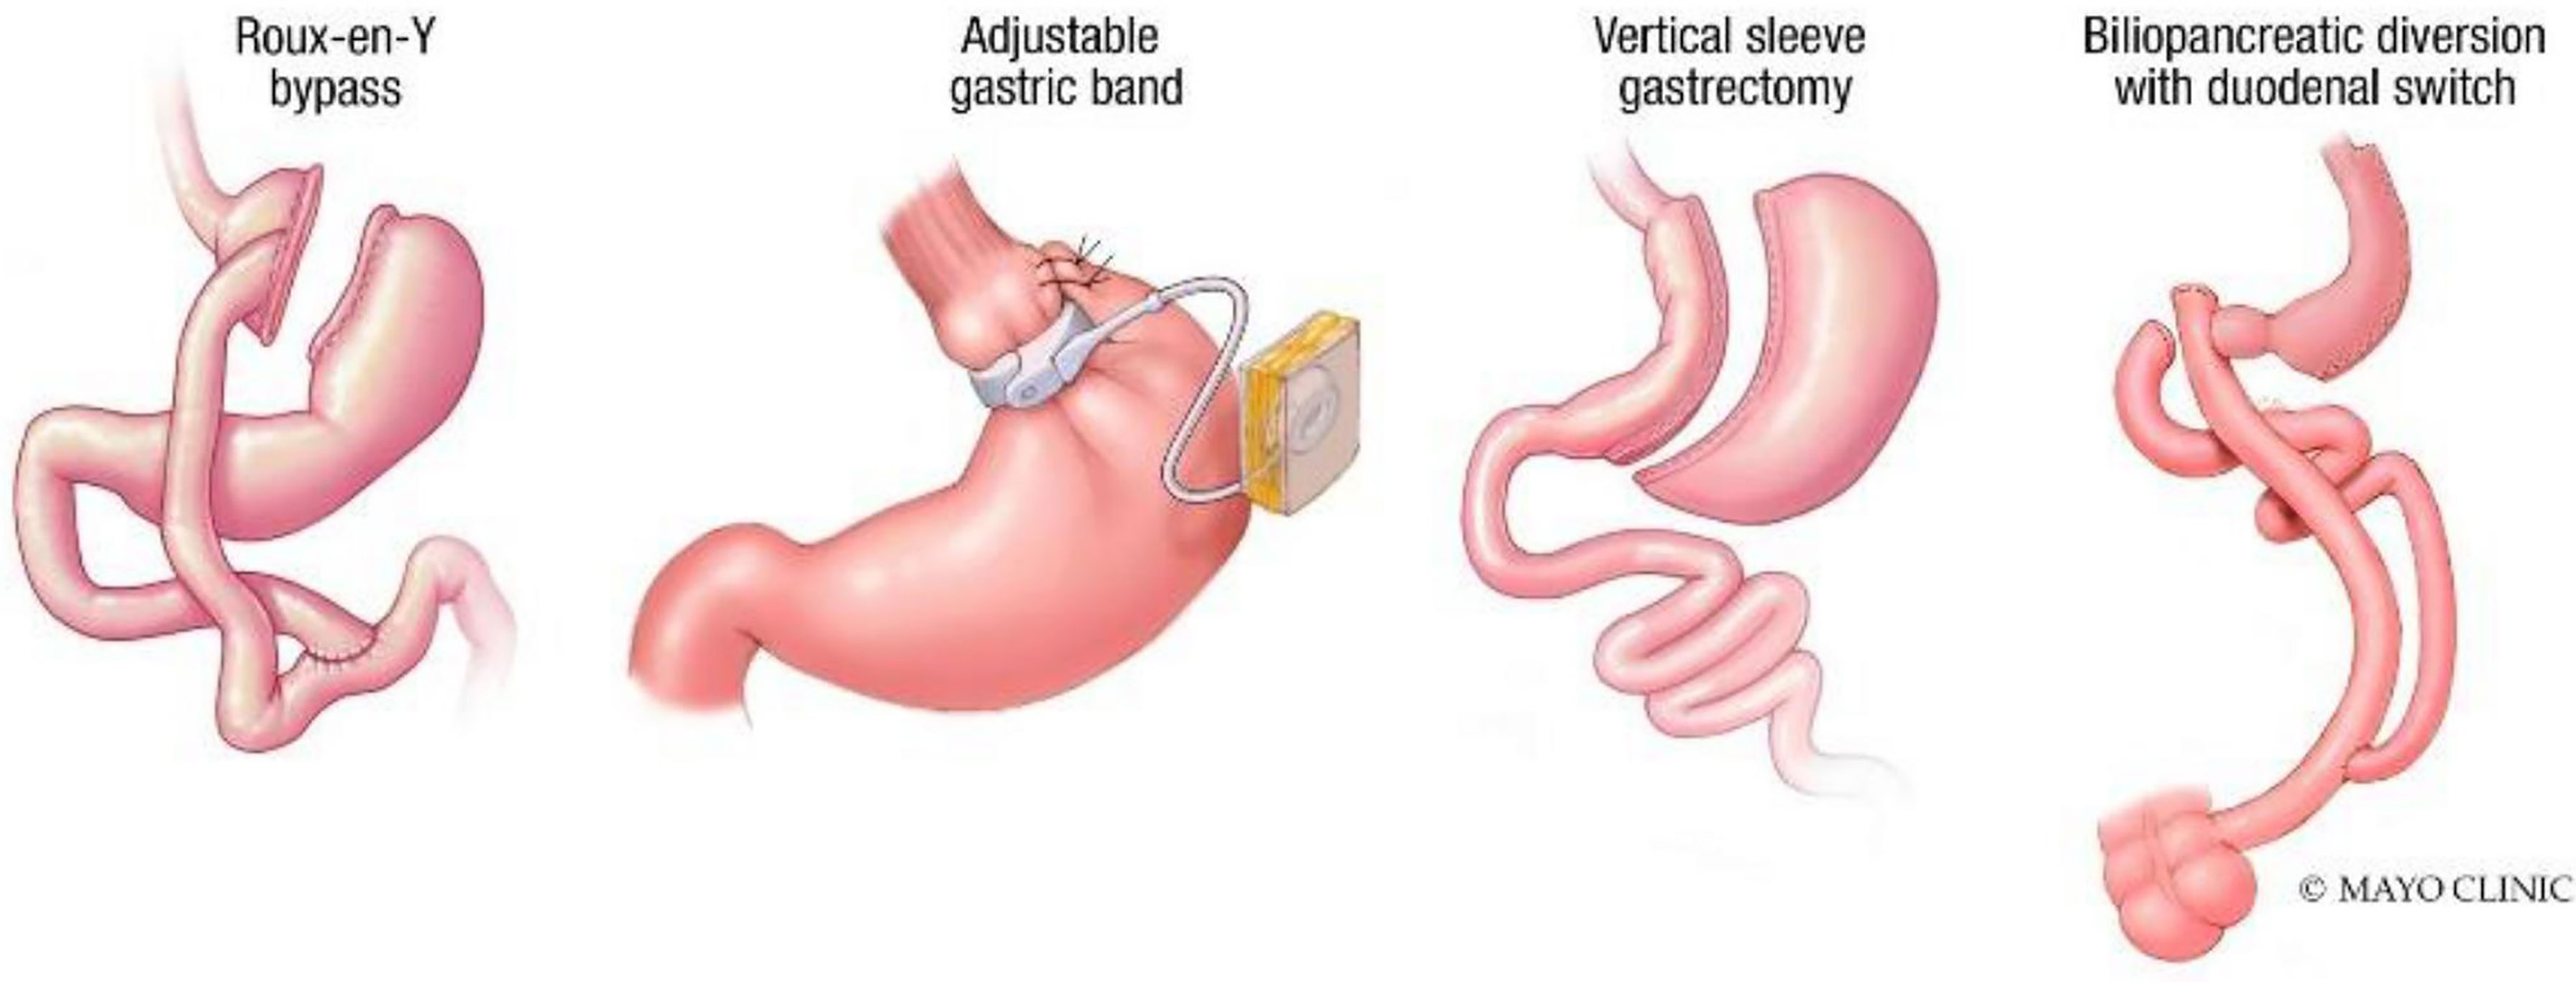 Endoscopic Options for Weight Loss